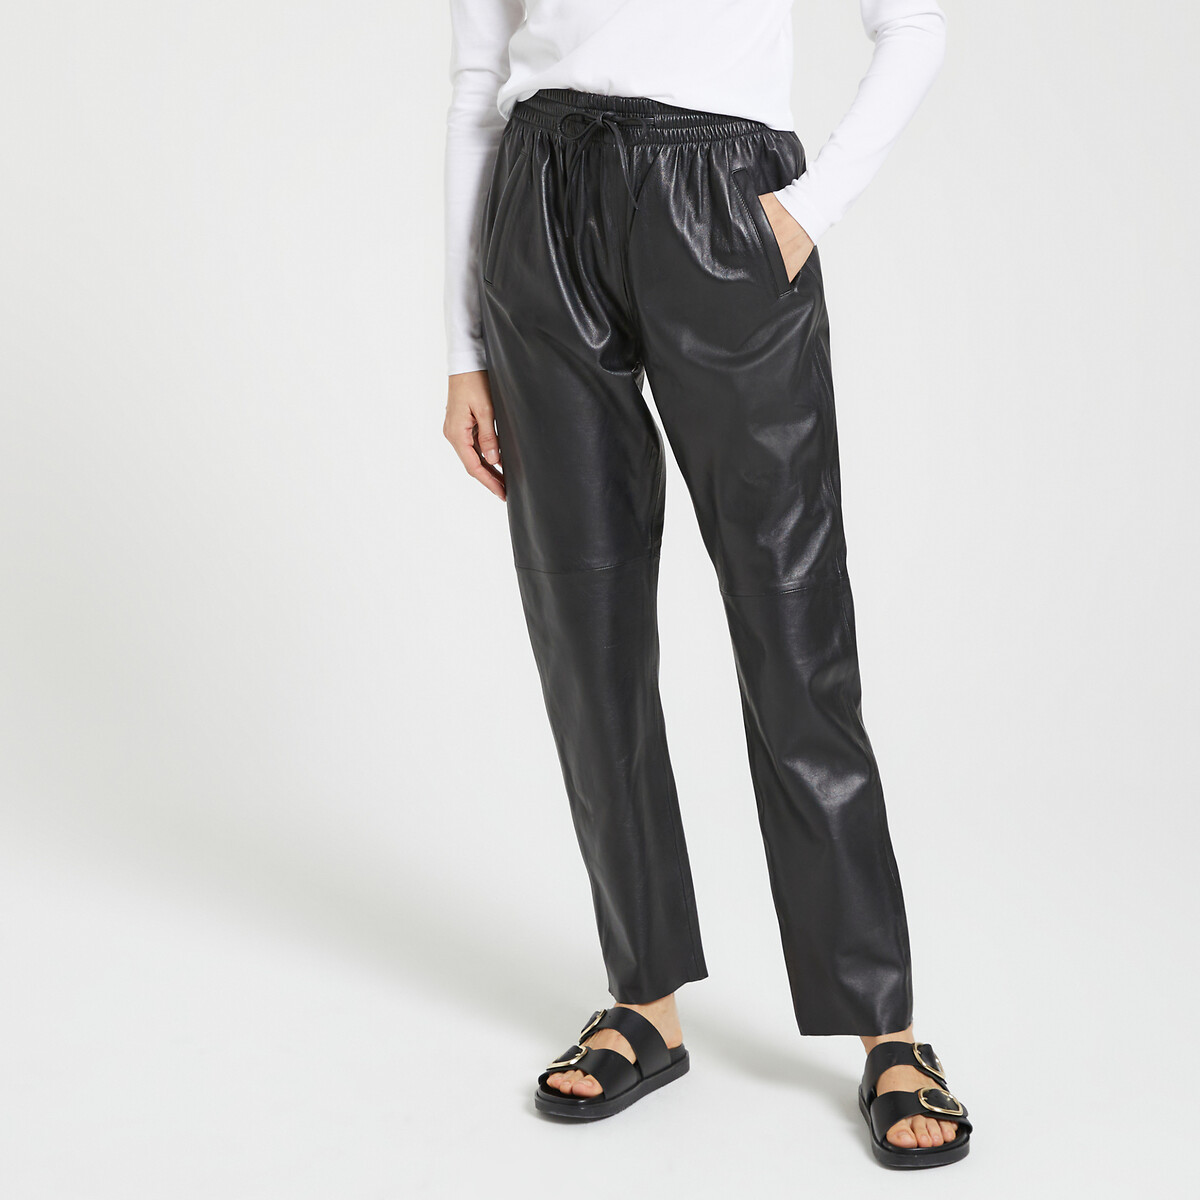 Gift Leather Trousers, Length 26"